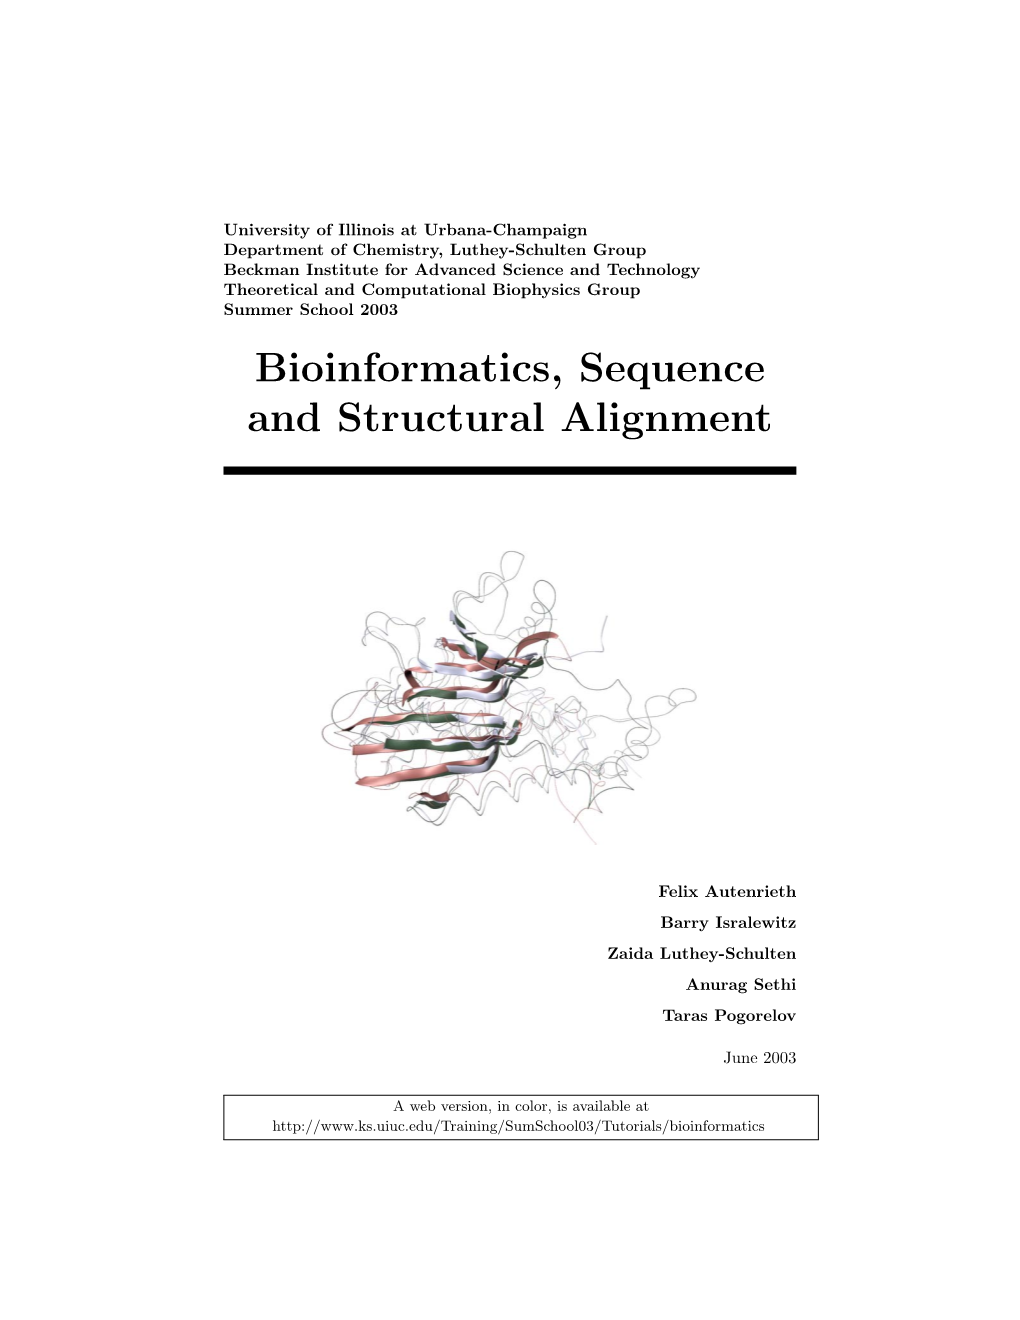 Bioinformatics, Sequence and Structural Alignment